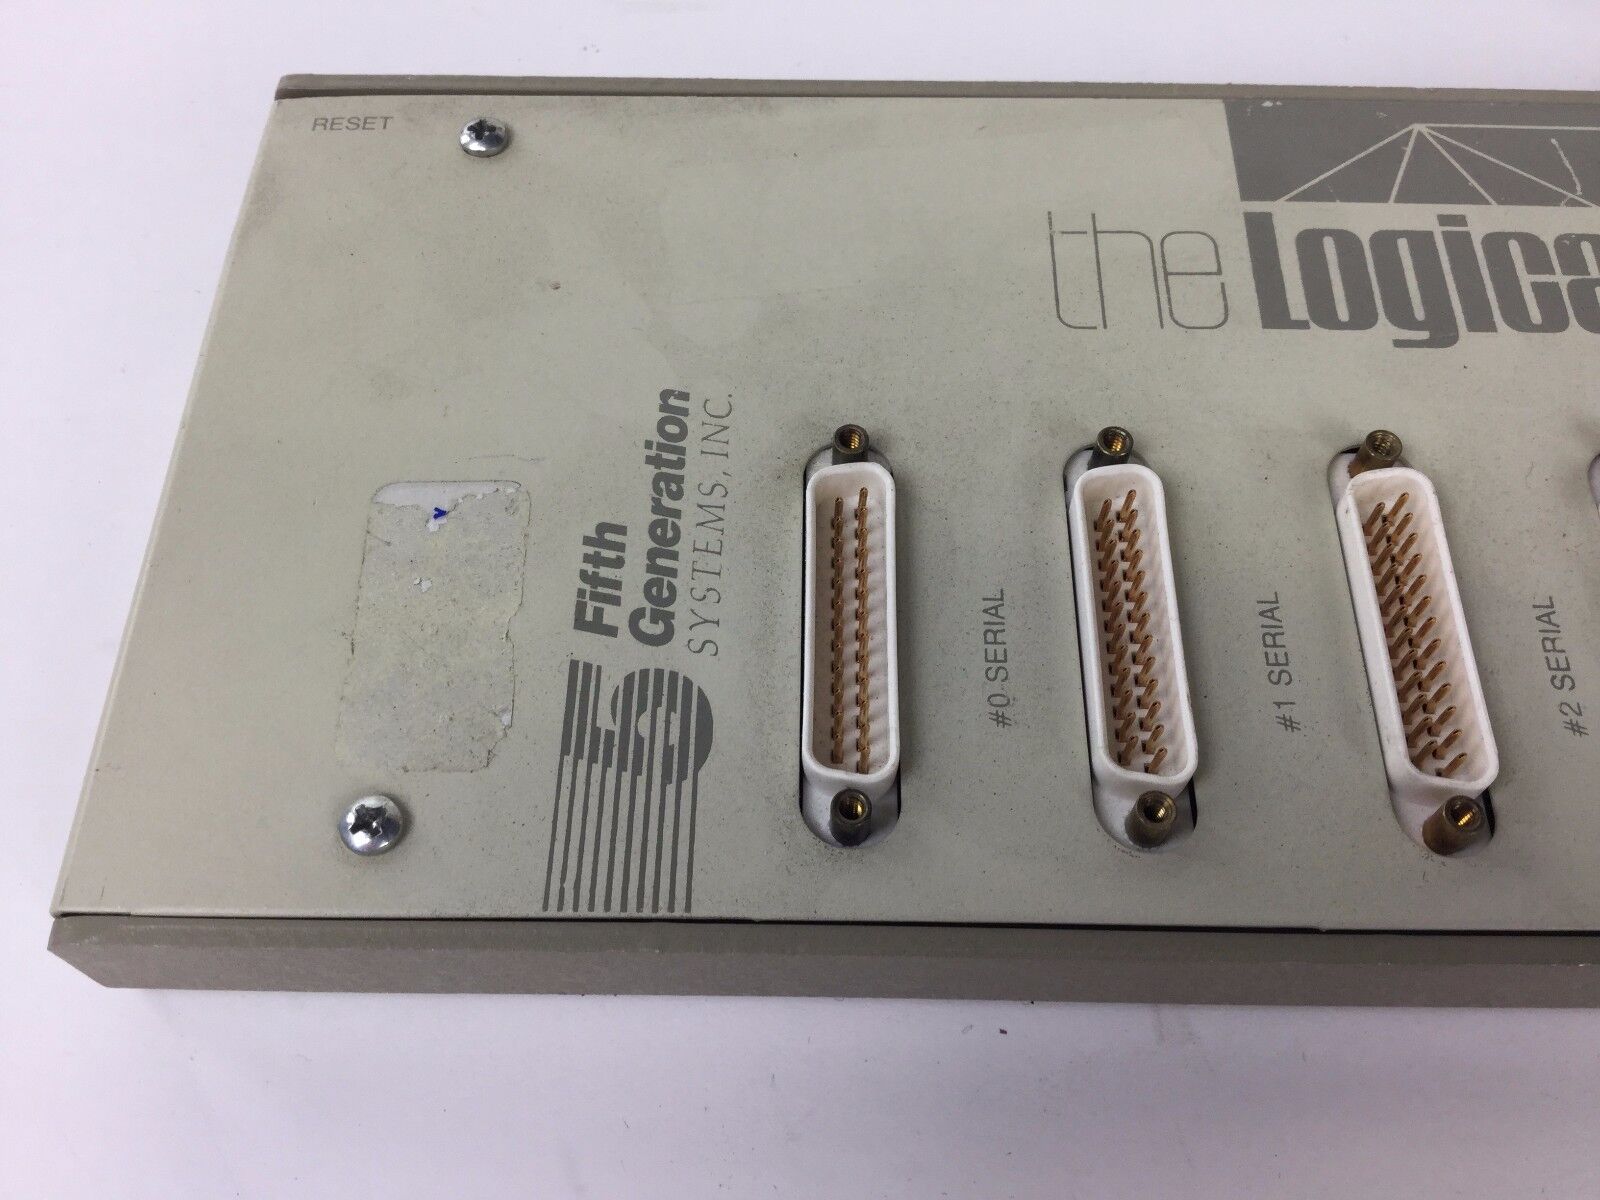 Fifth Generation - The Logical Connection Model LC-01 Peripheral Sharing Device